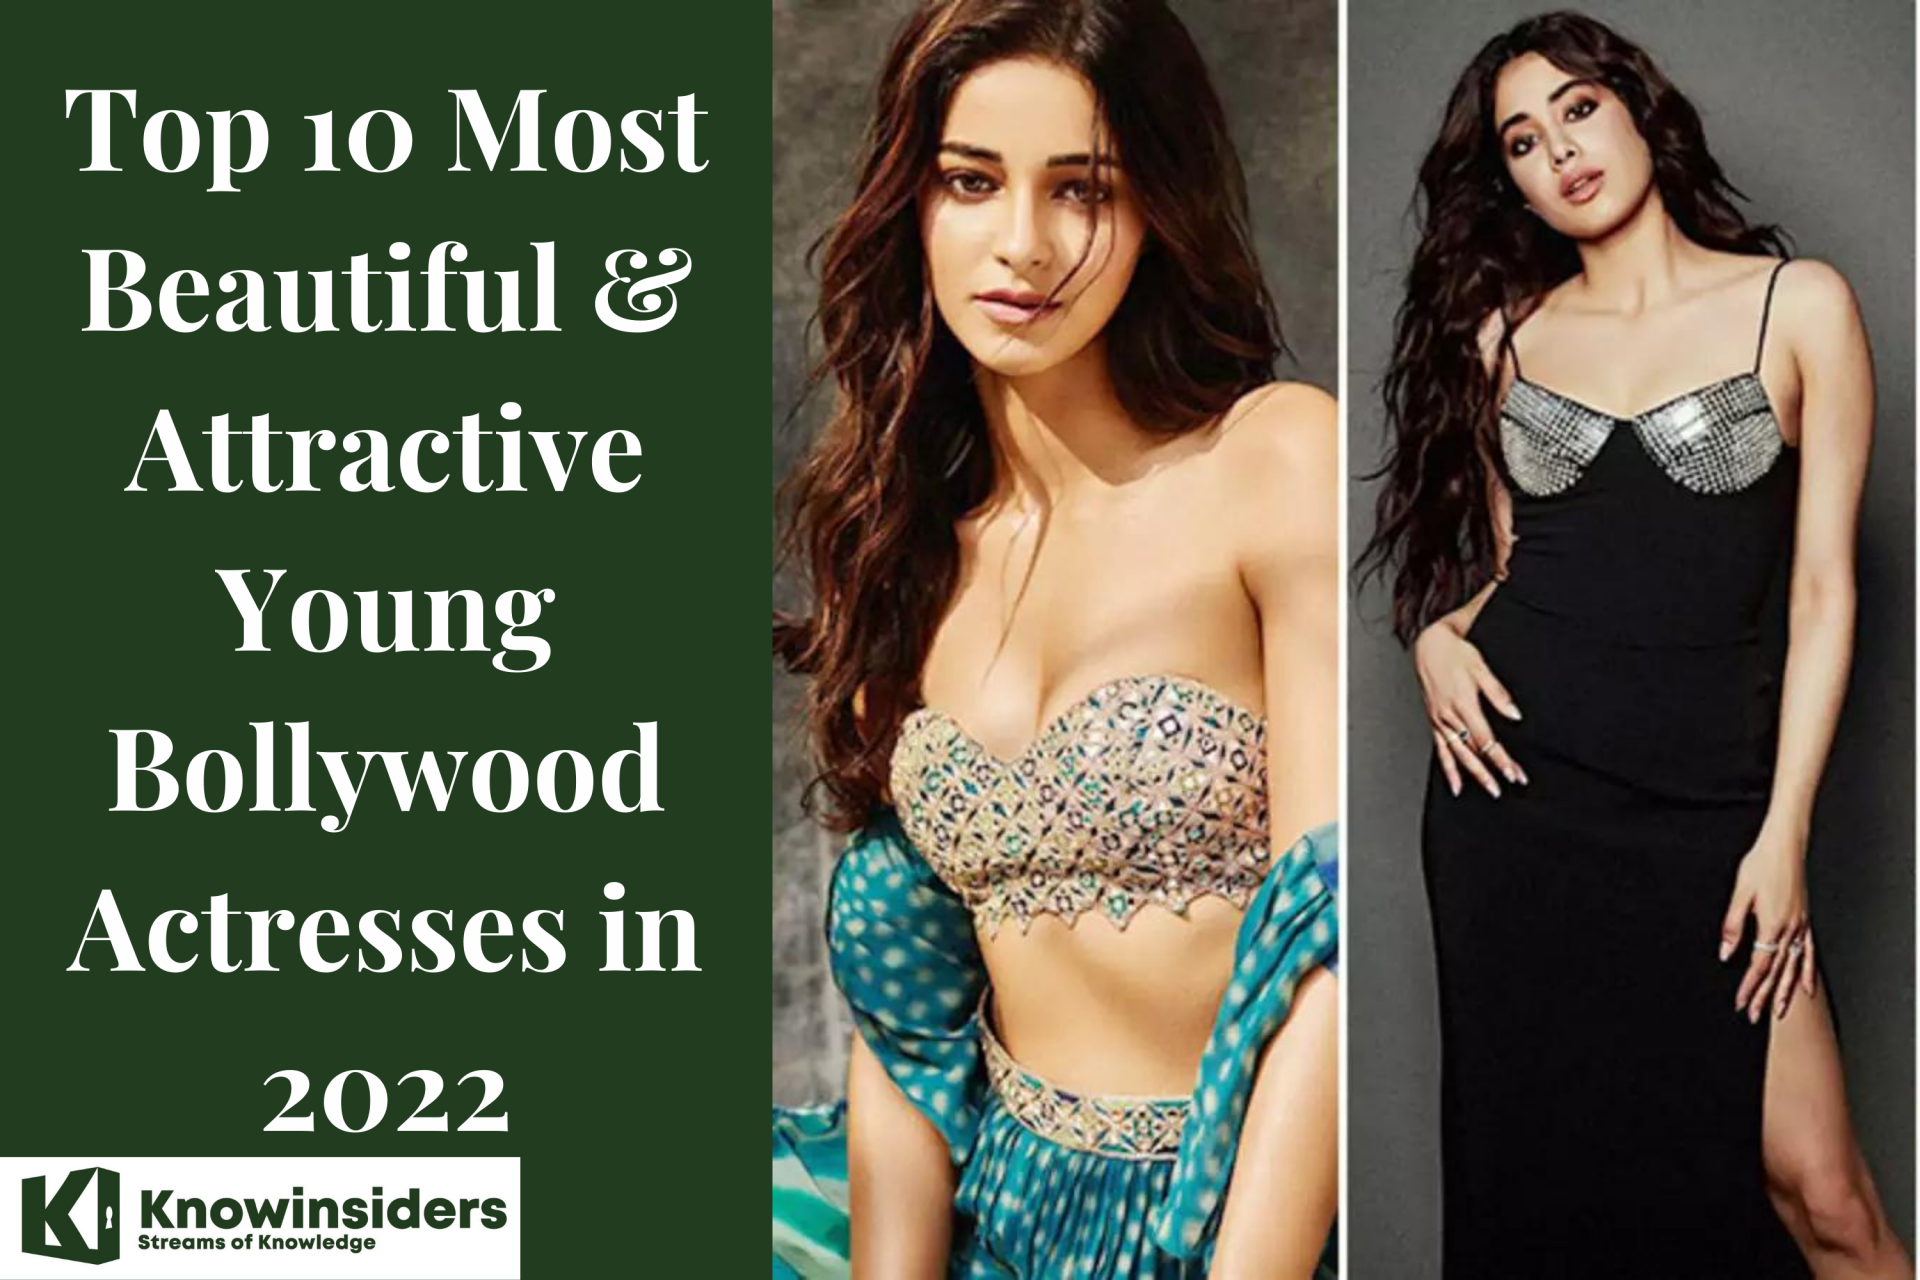 Top 10 Most Beautiful & Attractive Young Bollywood Actresses 2022/2023